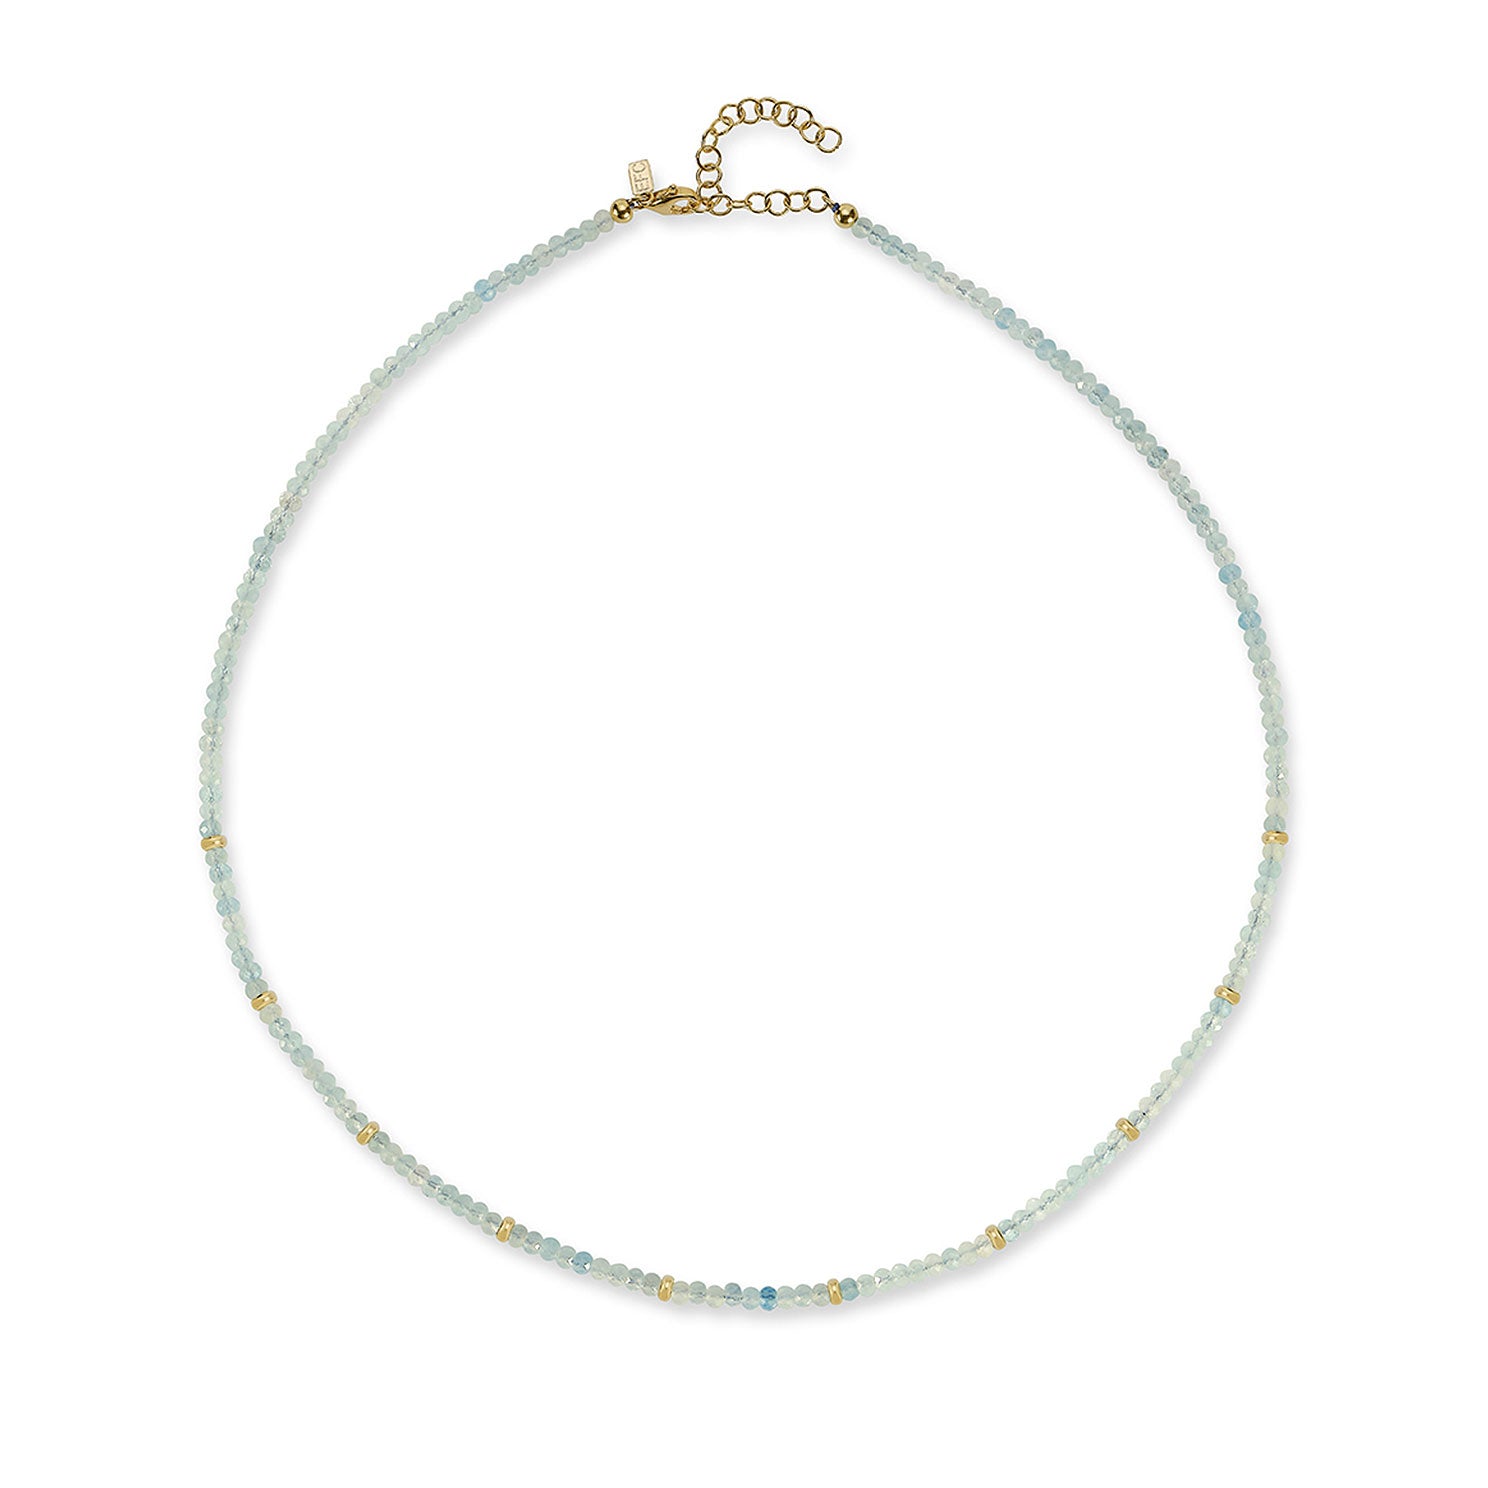 Birthstone Bead Necklace In Aquamarine with 14k yellow gold chain